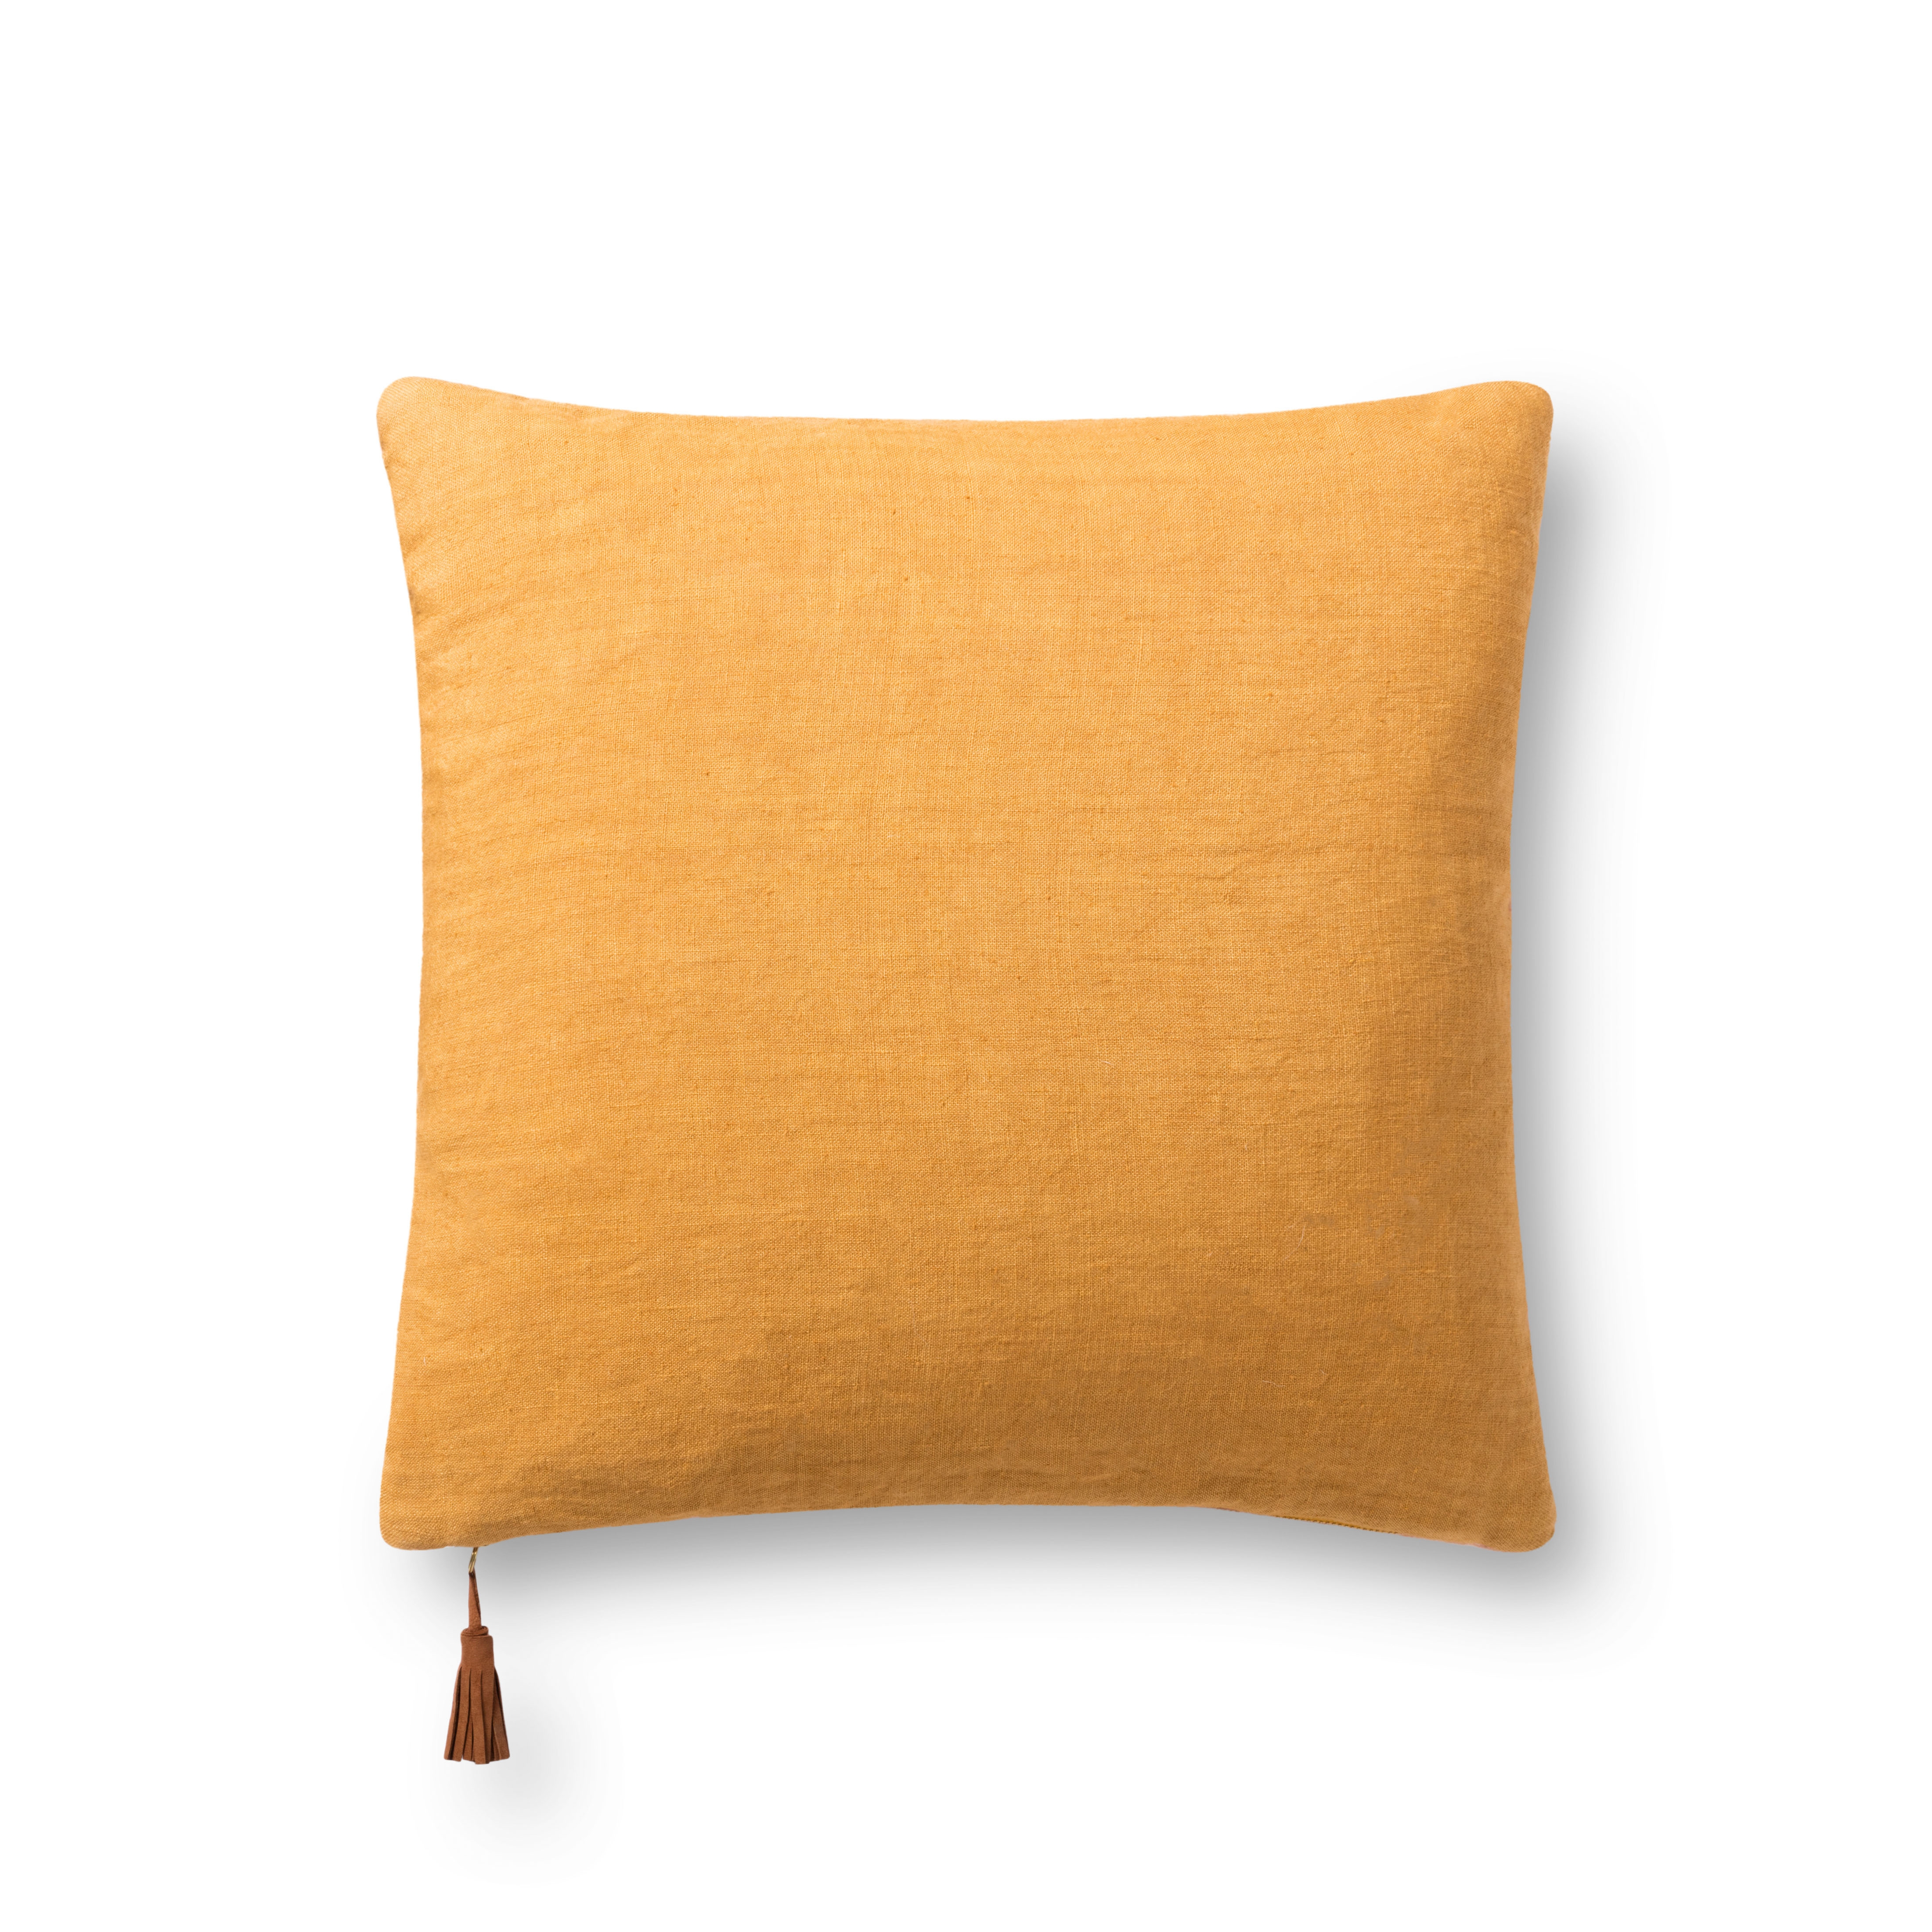 Magnolia Home by Joanna Gaines x Loloi Pillows P1153 Coral / Gold 18" x 18" Cover Only - Image 1